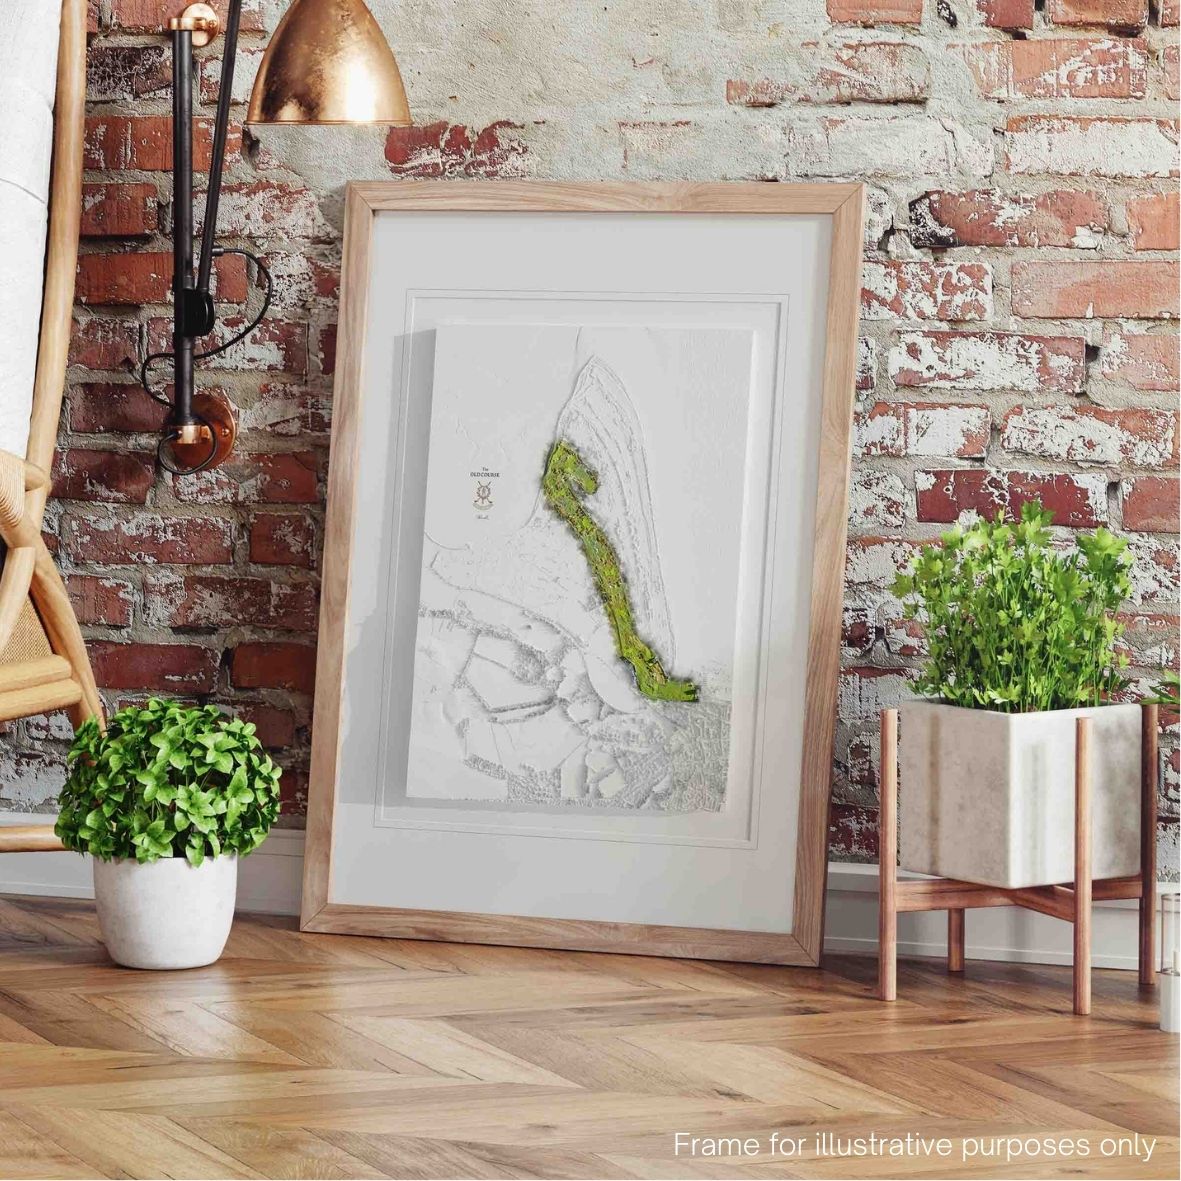 The Old Course & St Andrews Links Peninsula Framed Print on Floor